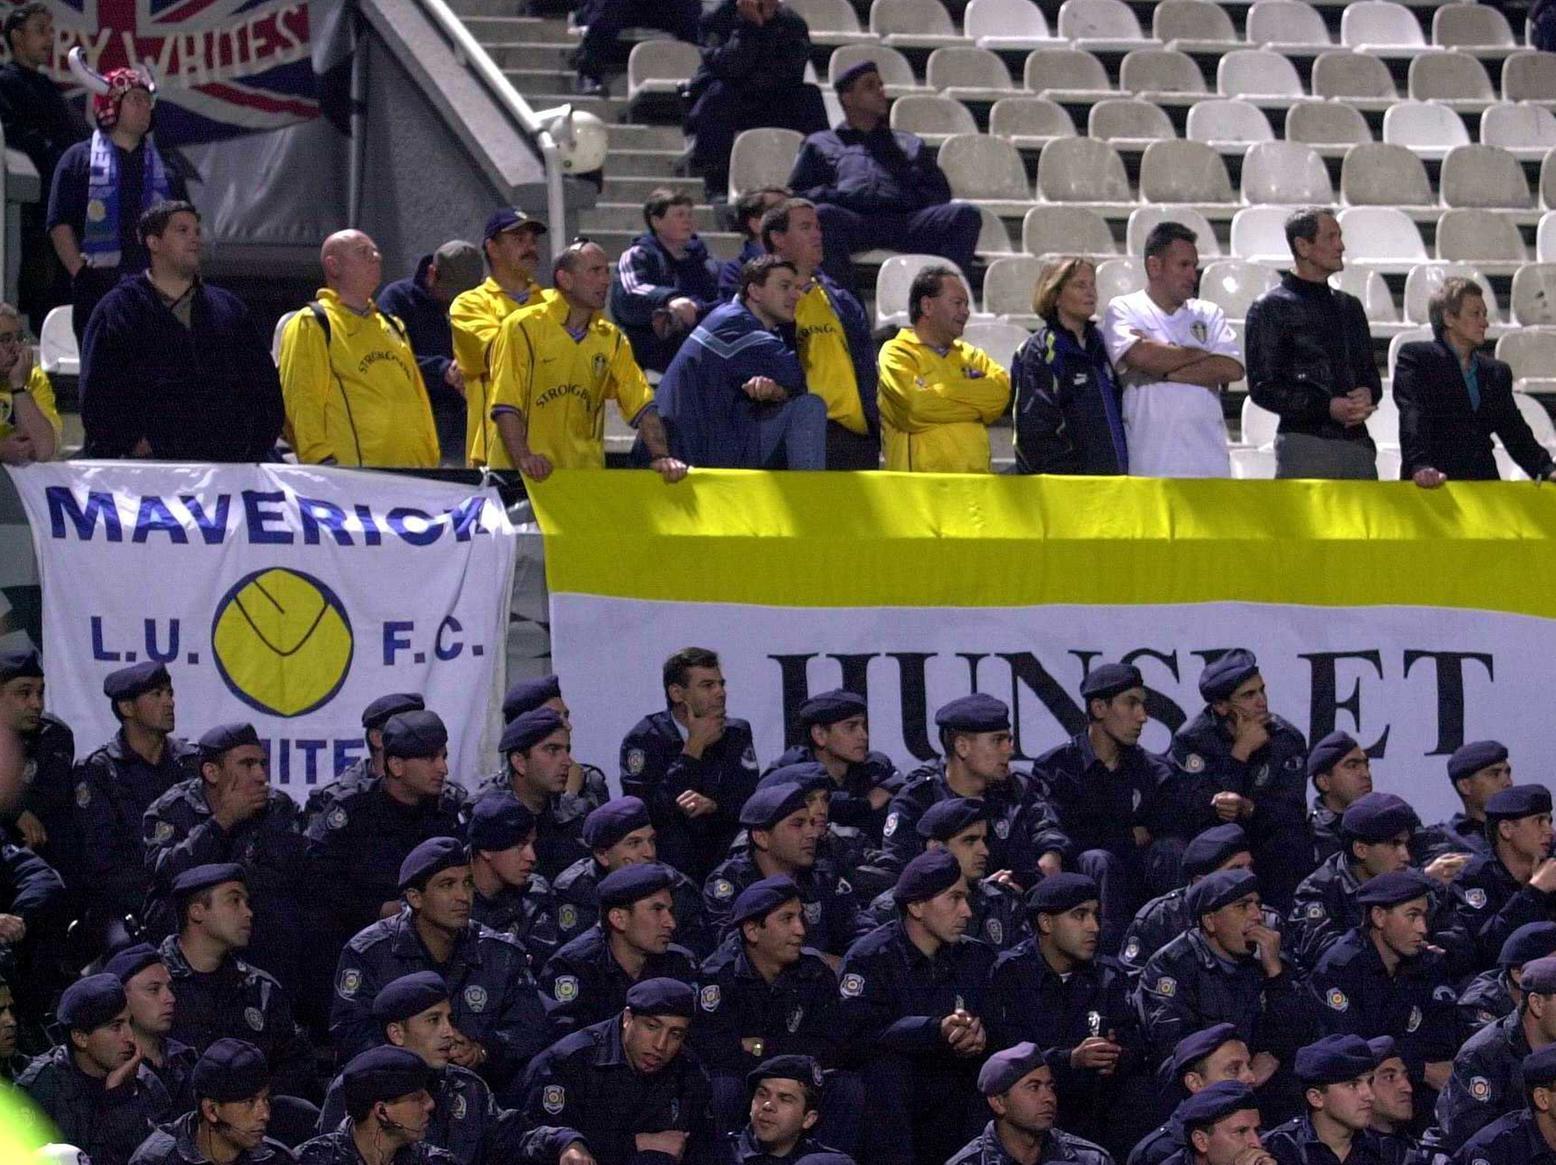 Leeds United fans under a heavy police cordon during the game at the Inonu Stadium in Istanbul.